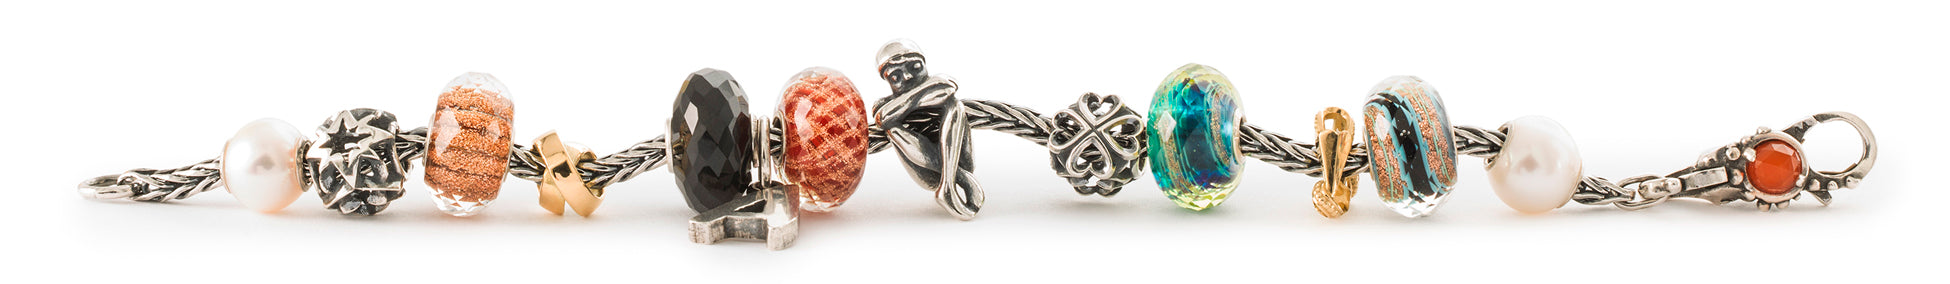 Trollbeads foxtail bracelet with beads in pearl, glass, silver, and stone, symbolizing the felling of togetherness